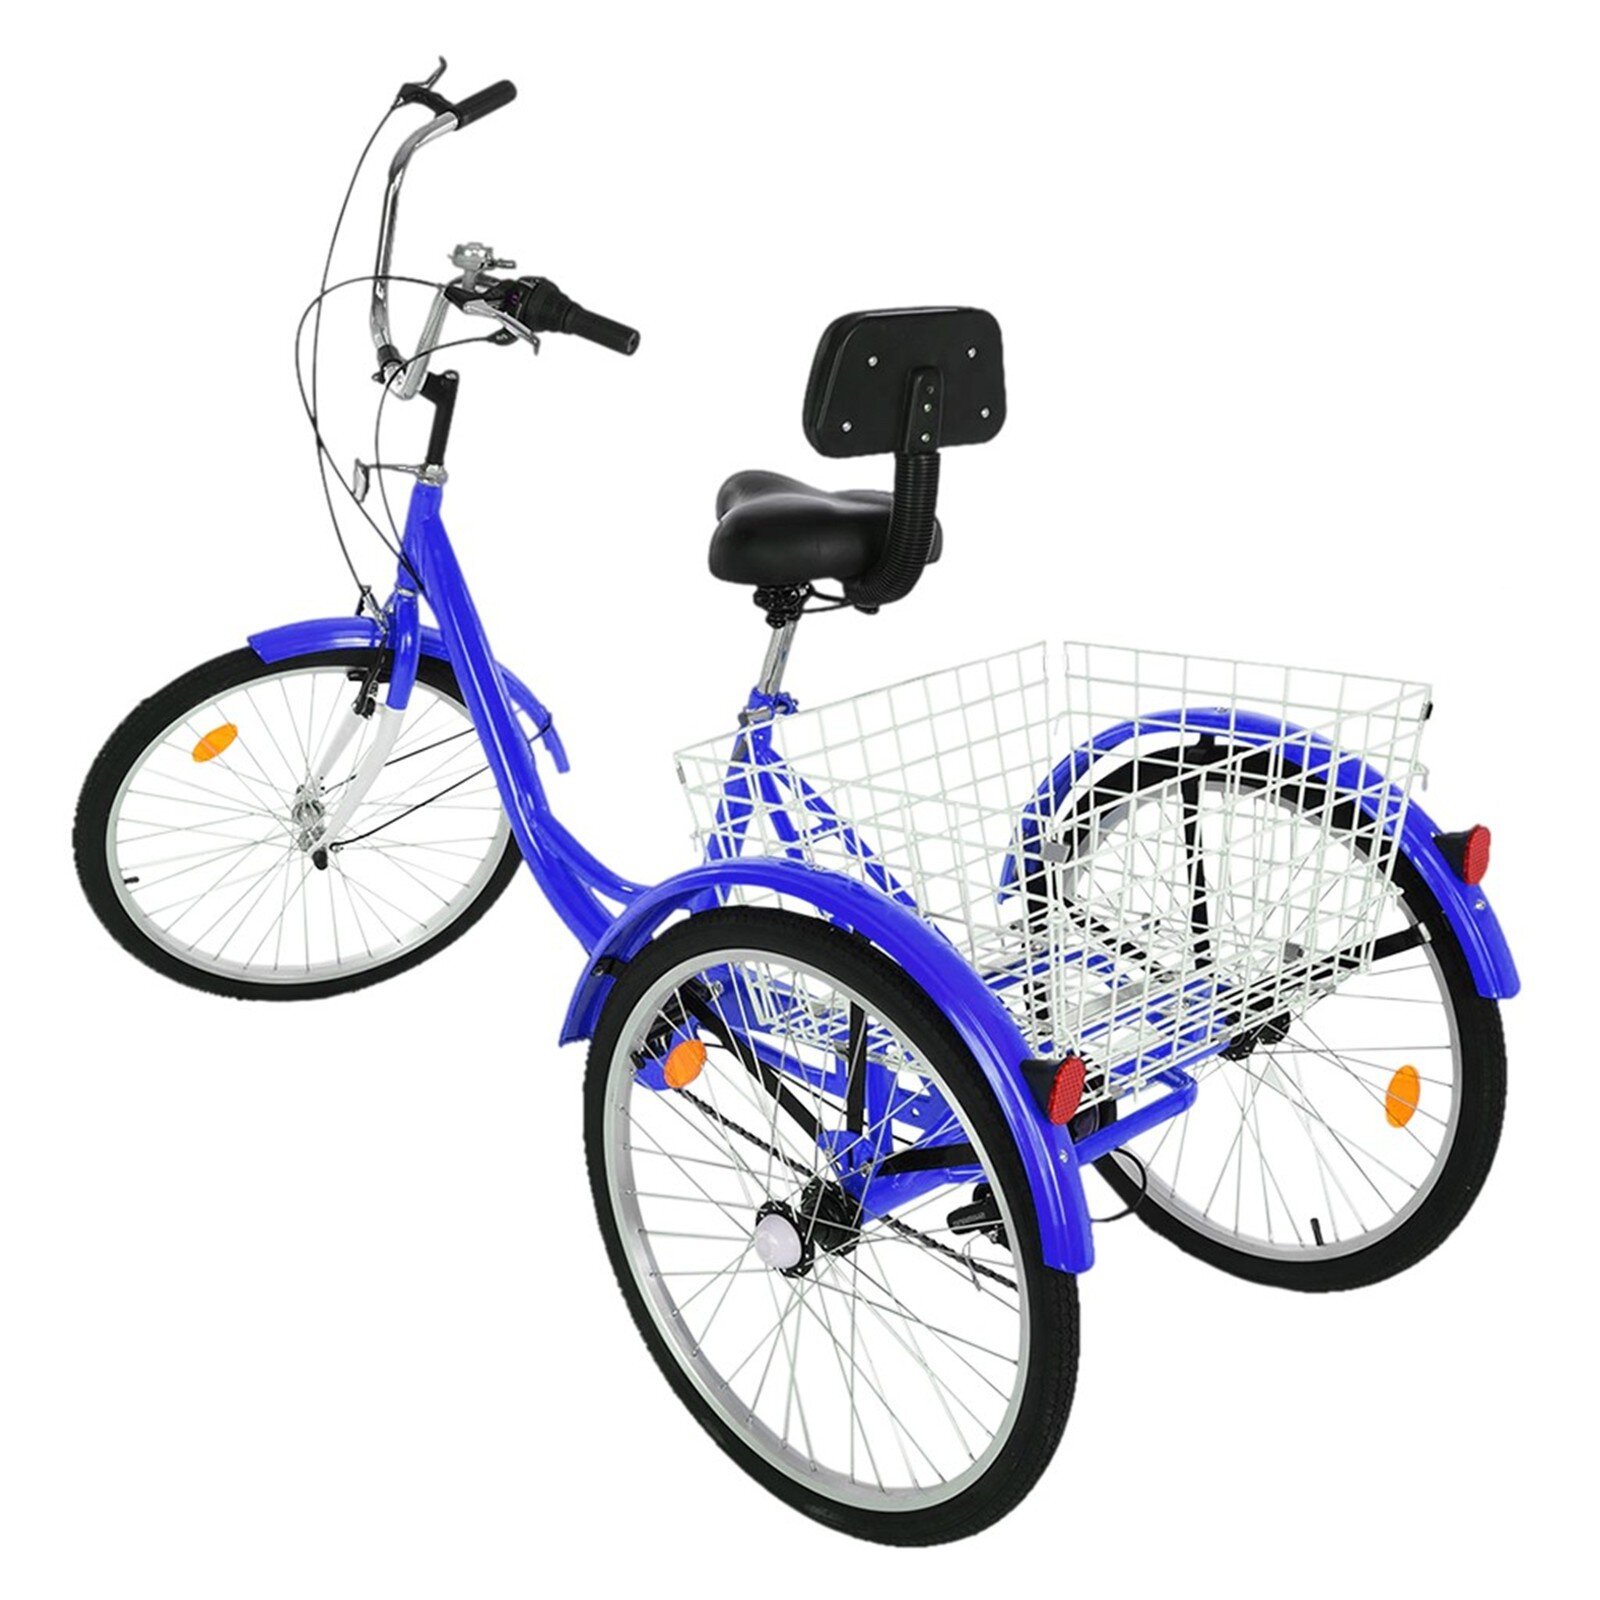 Adult Tricycle 1//7 Speed 3-Wheel For Shopping W// Installation Tools picnics New